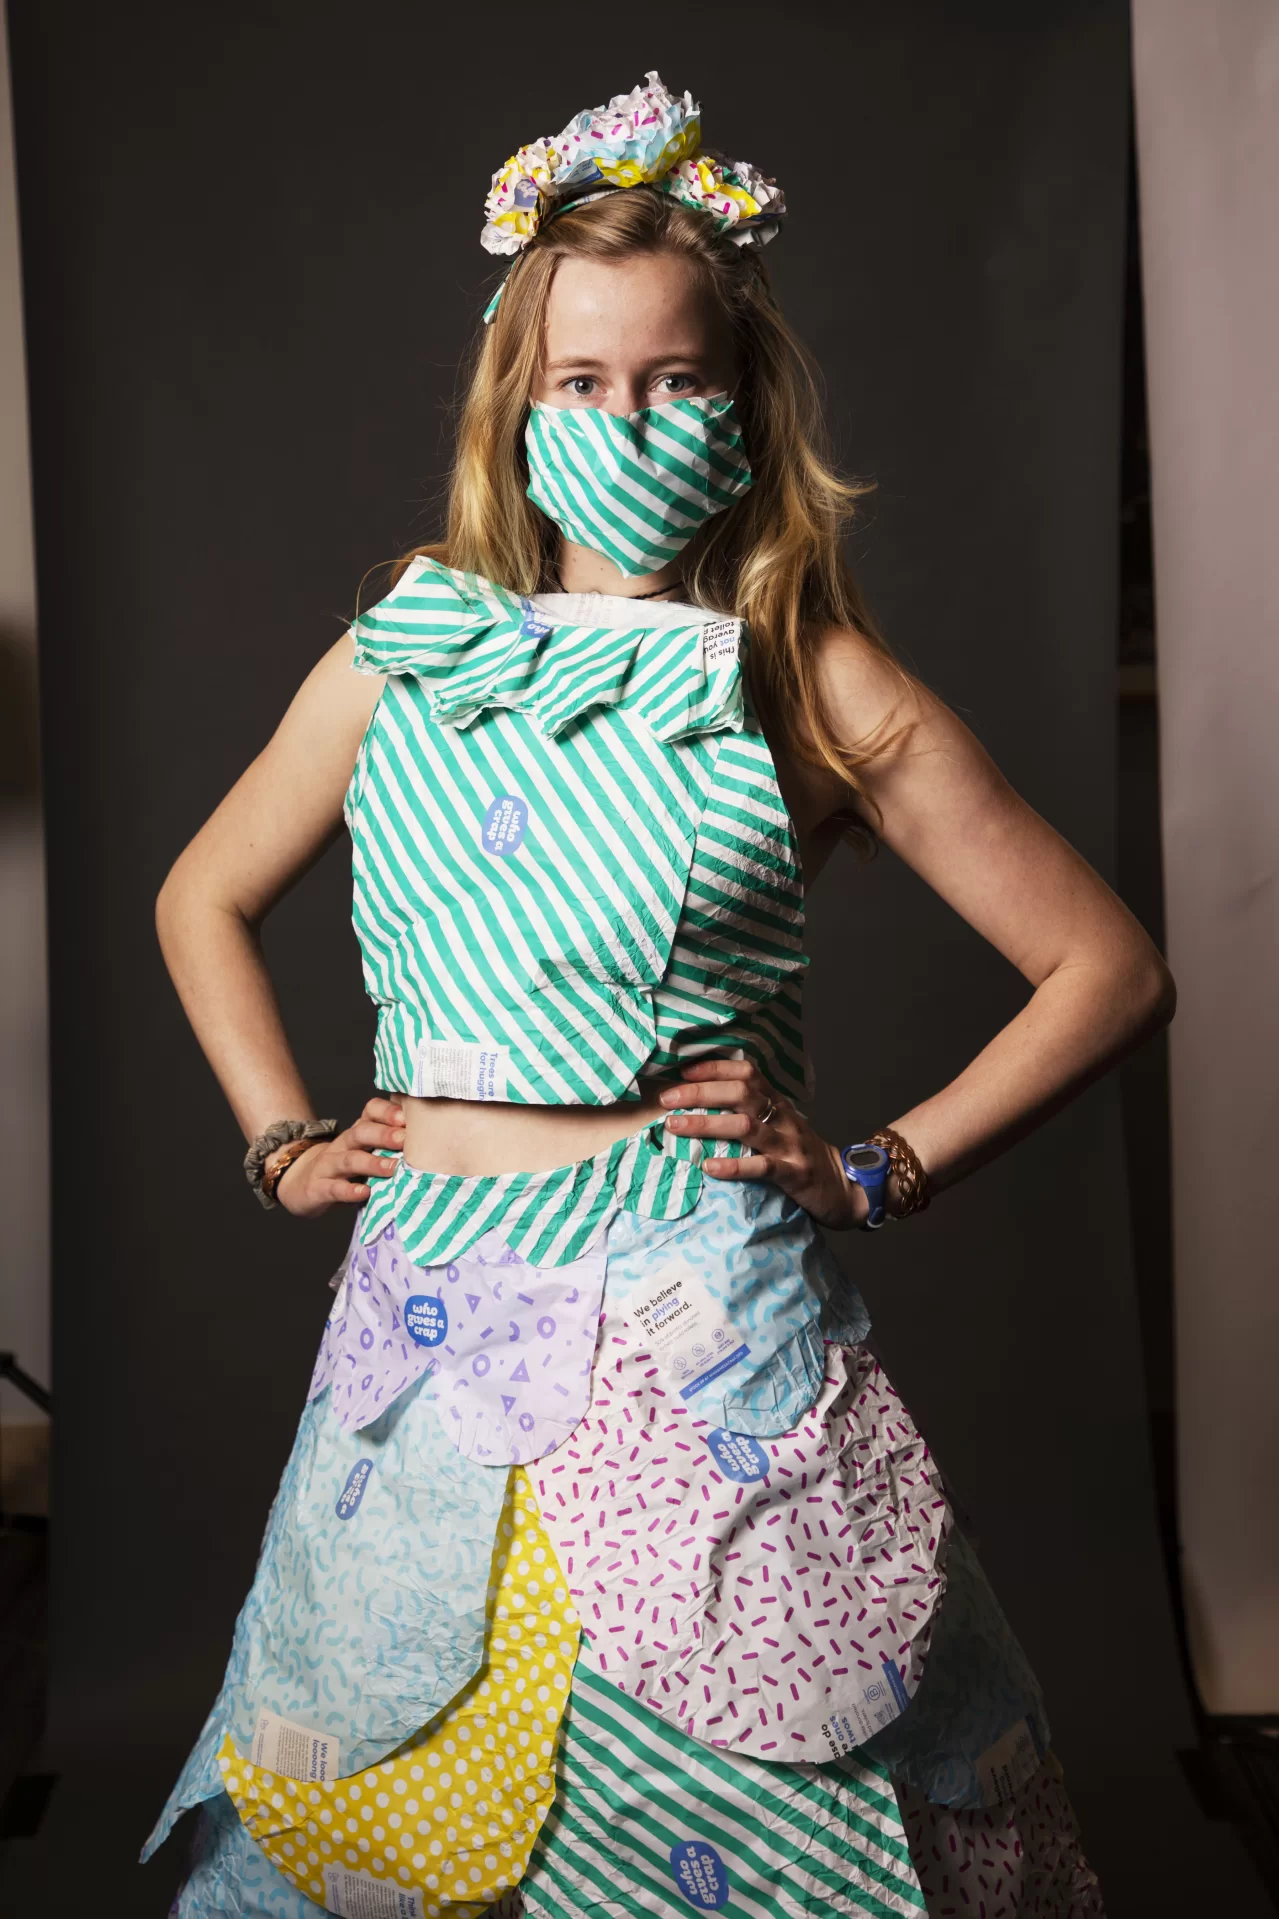 Essie Martin ‘22 of Newcastle, Maine, poses for portraits created for this years Trashion Show on November 15, 2021.